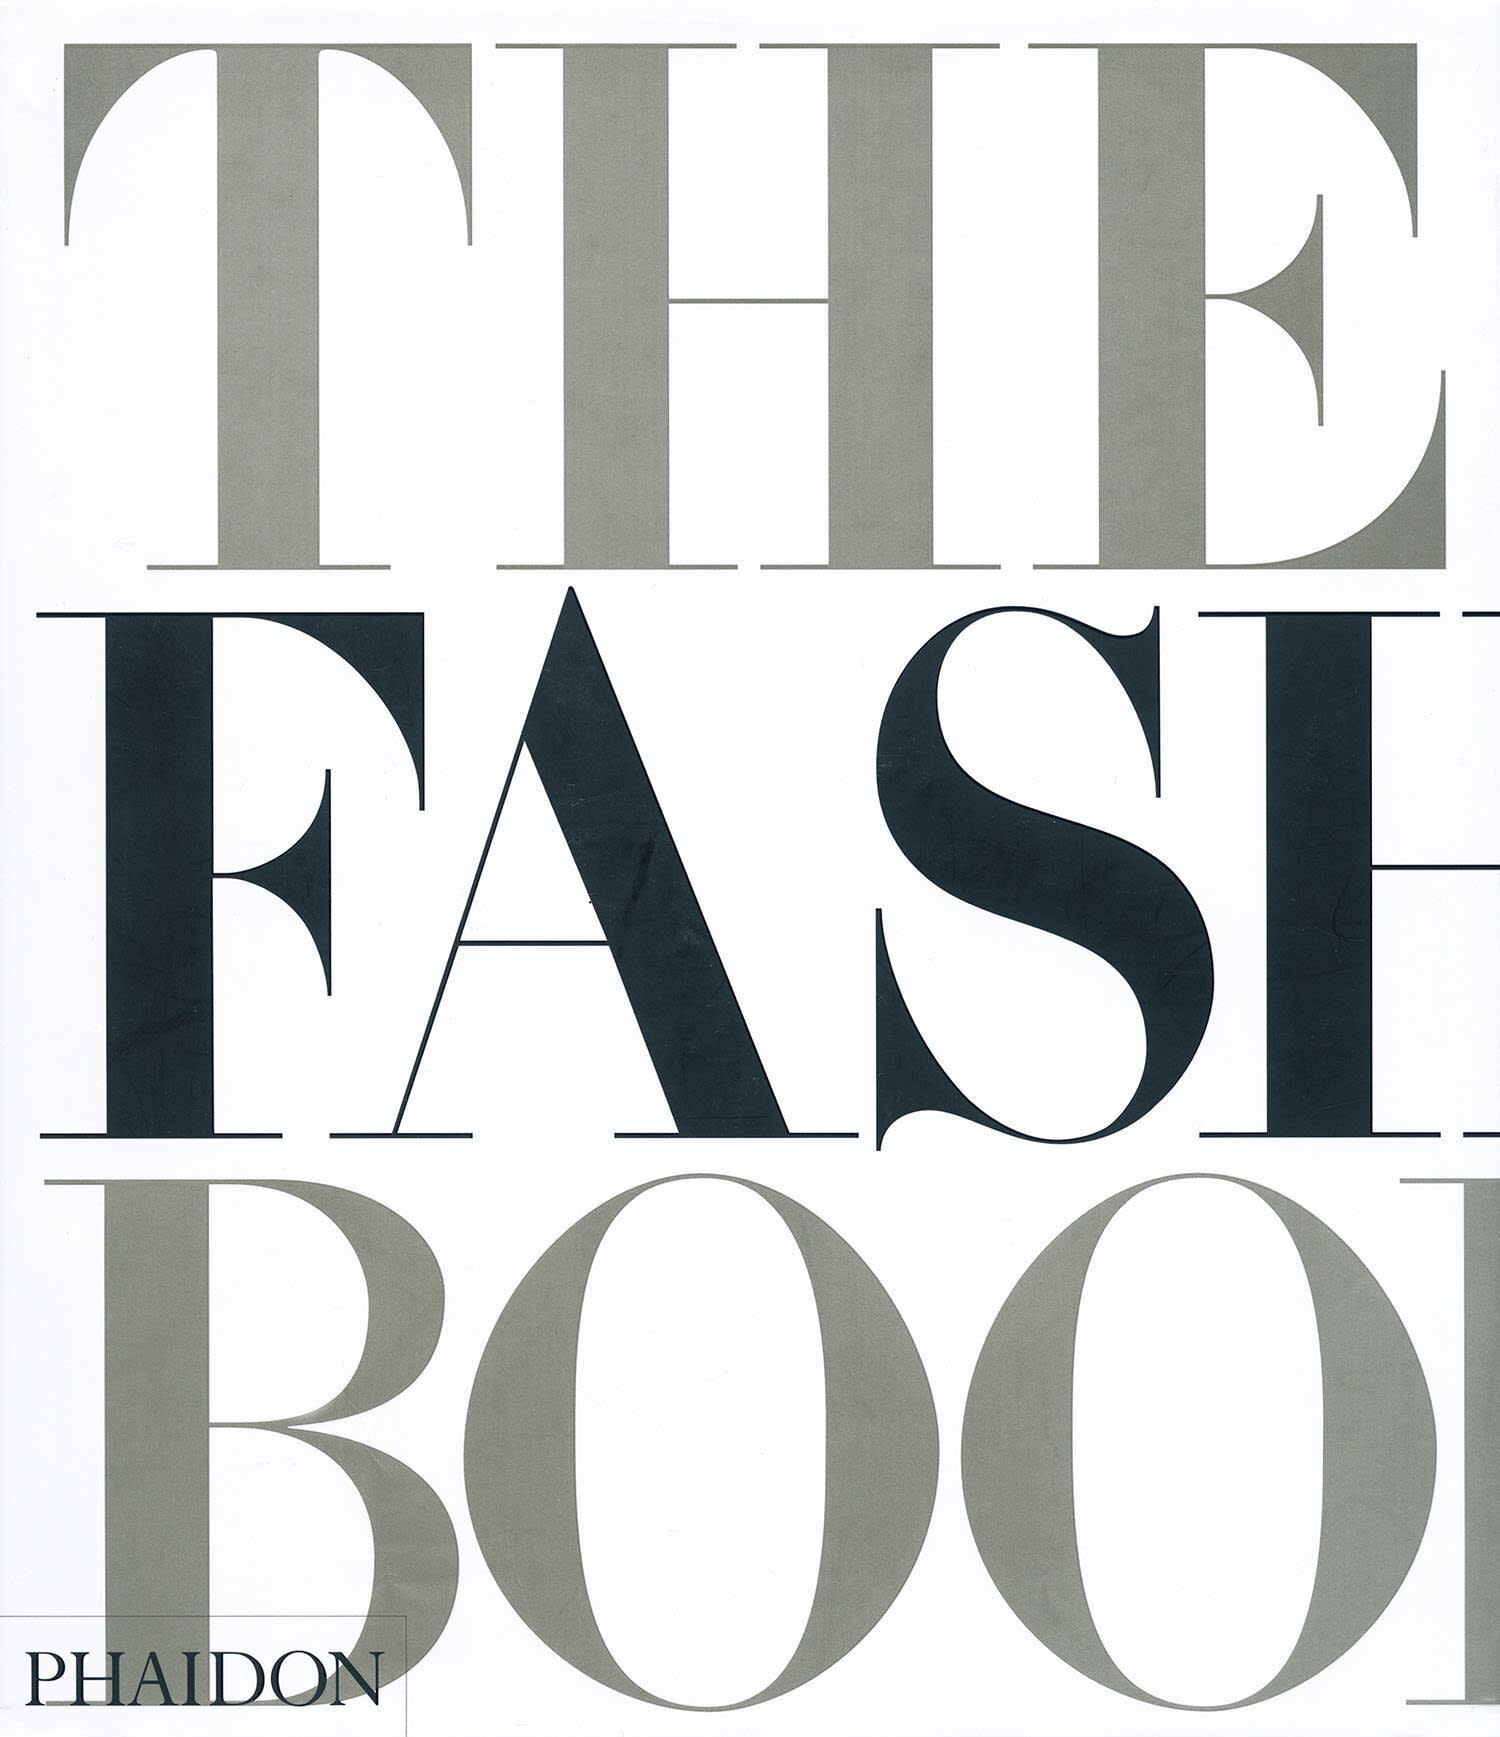 The front cover of The Fashion Book by Phaidon depicting text in large letters. 